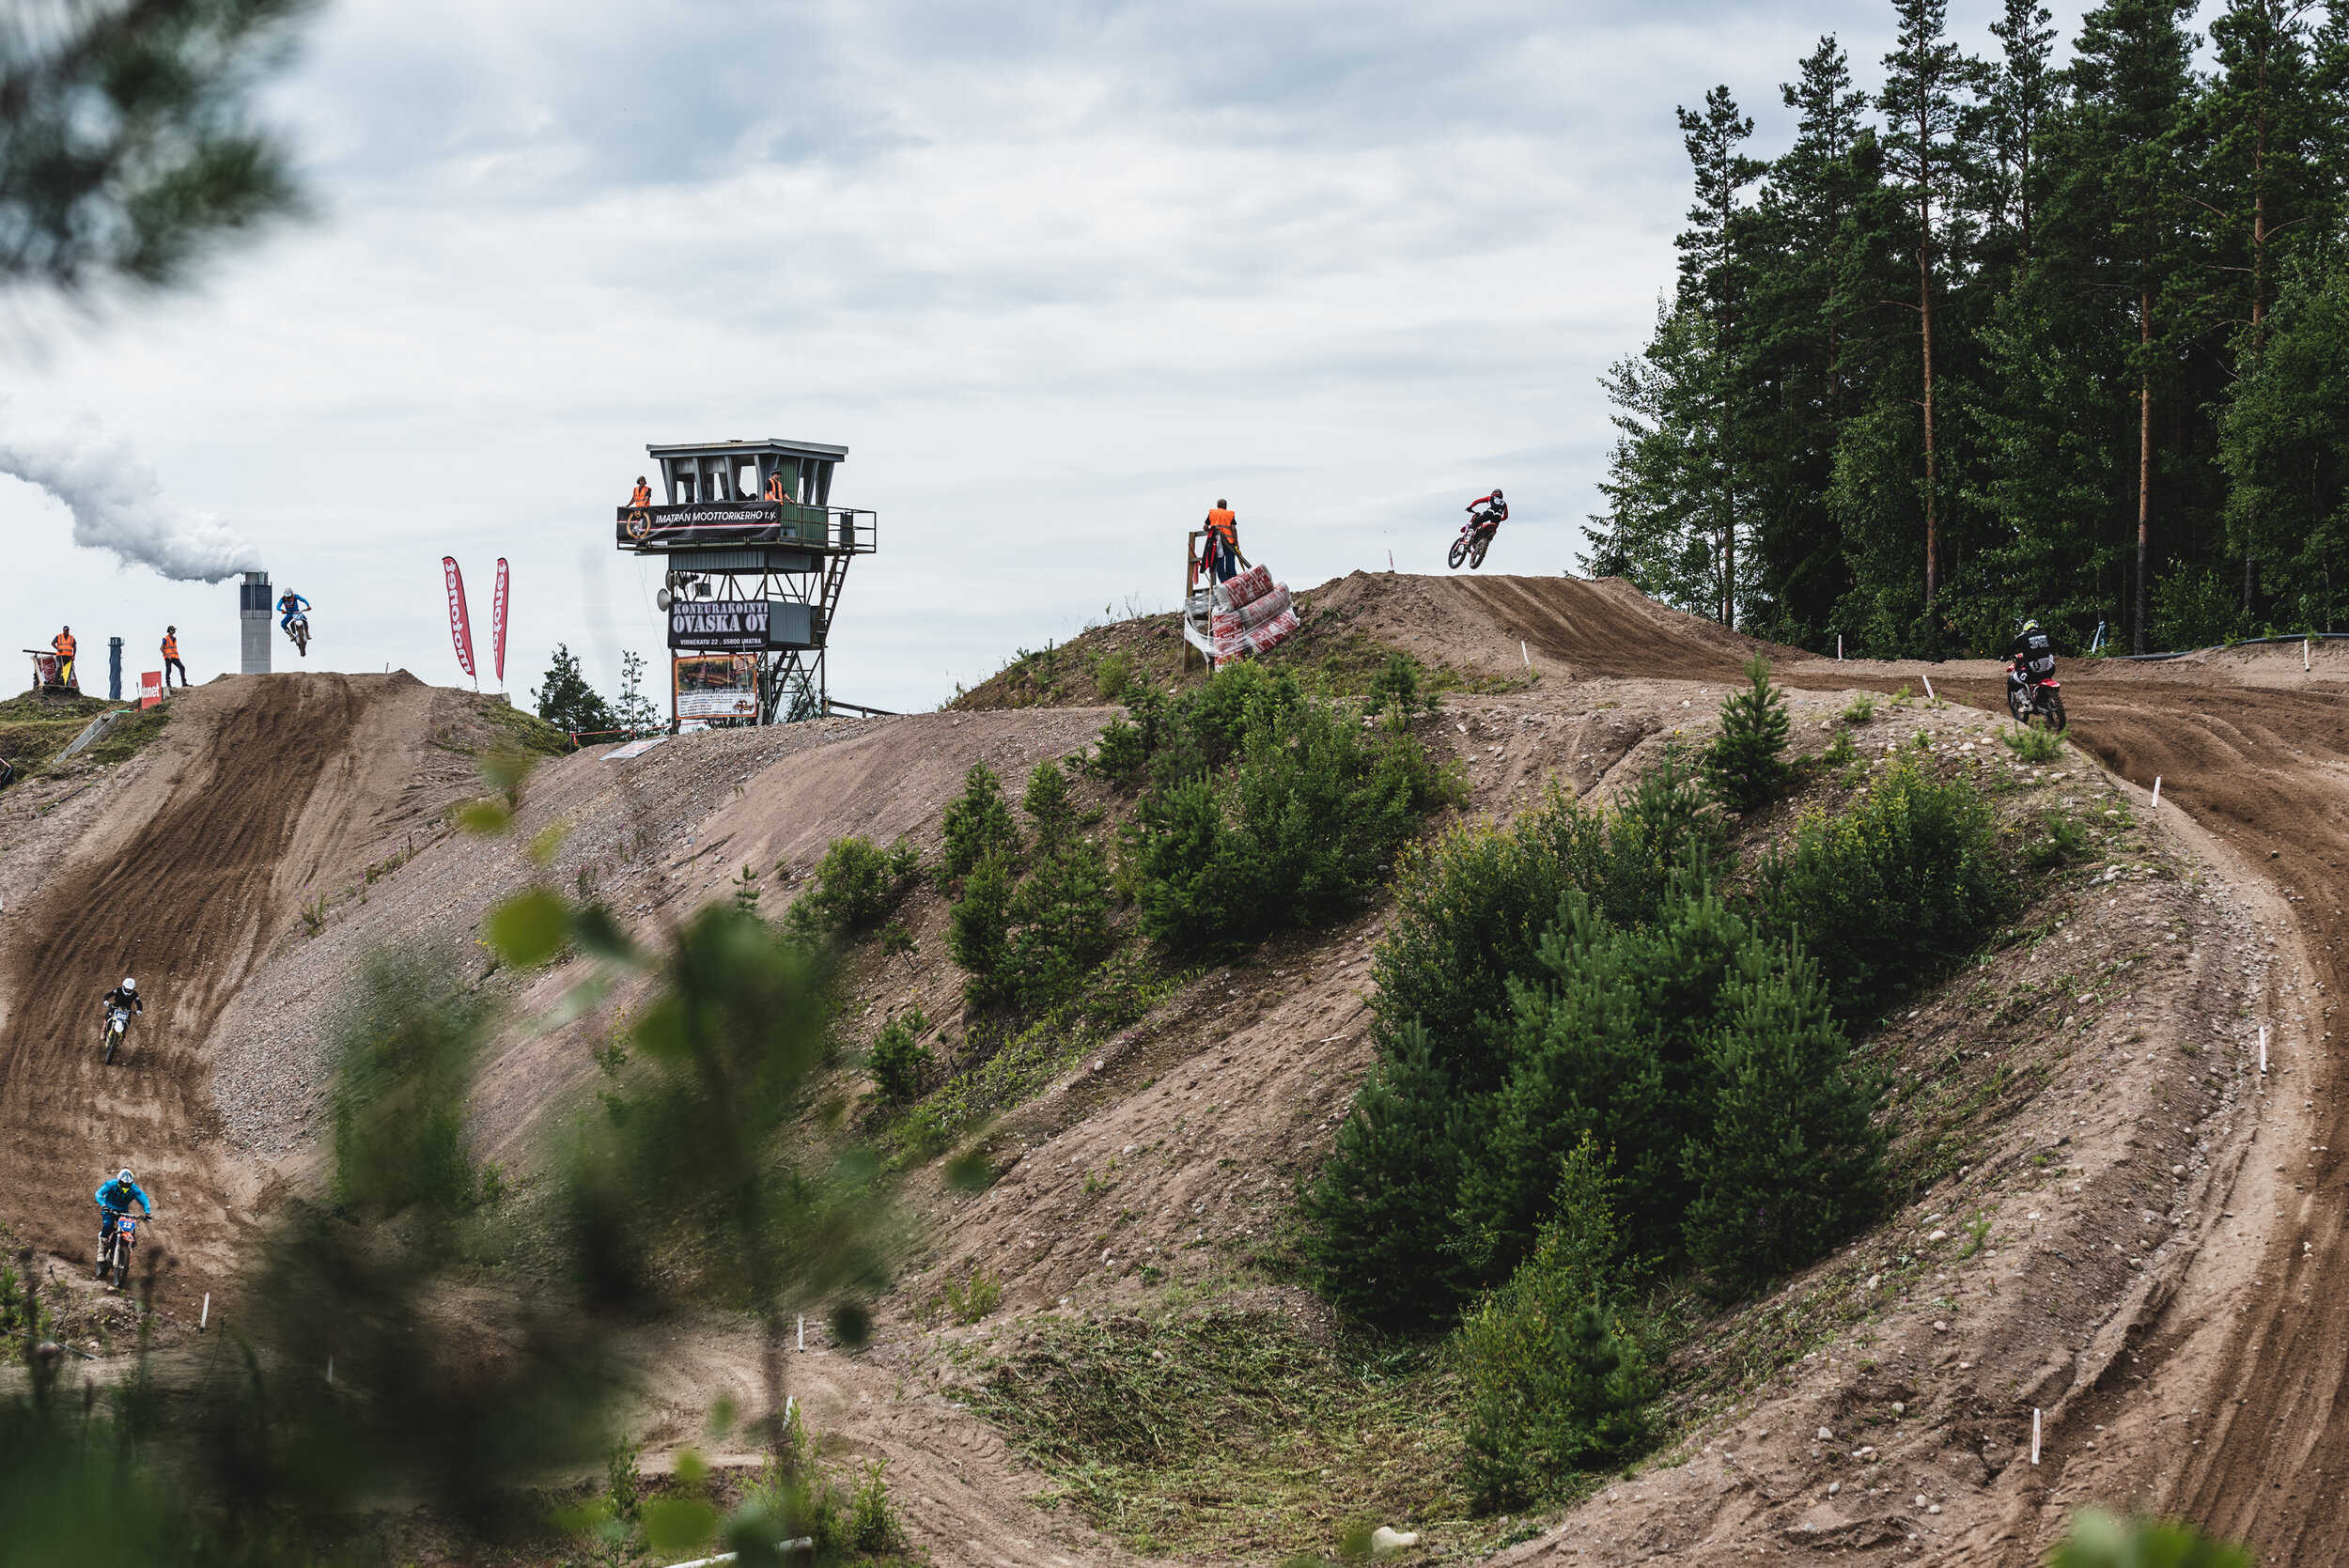  Lappeenranta/Imatra, 2019. Golf course and a motocross track on the other ends of the same gravel ridge formation.   